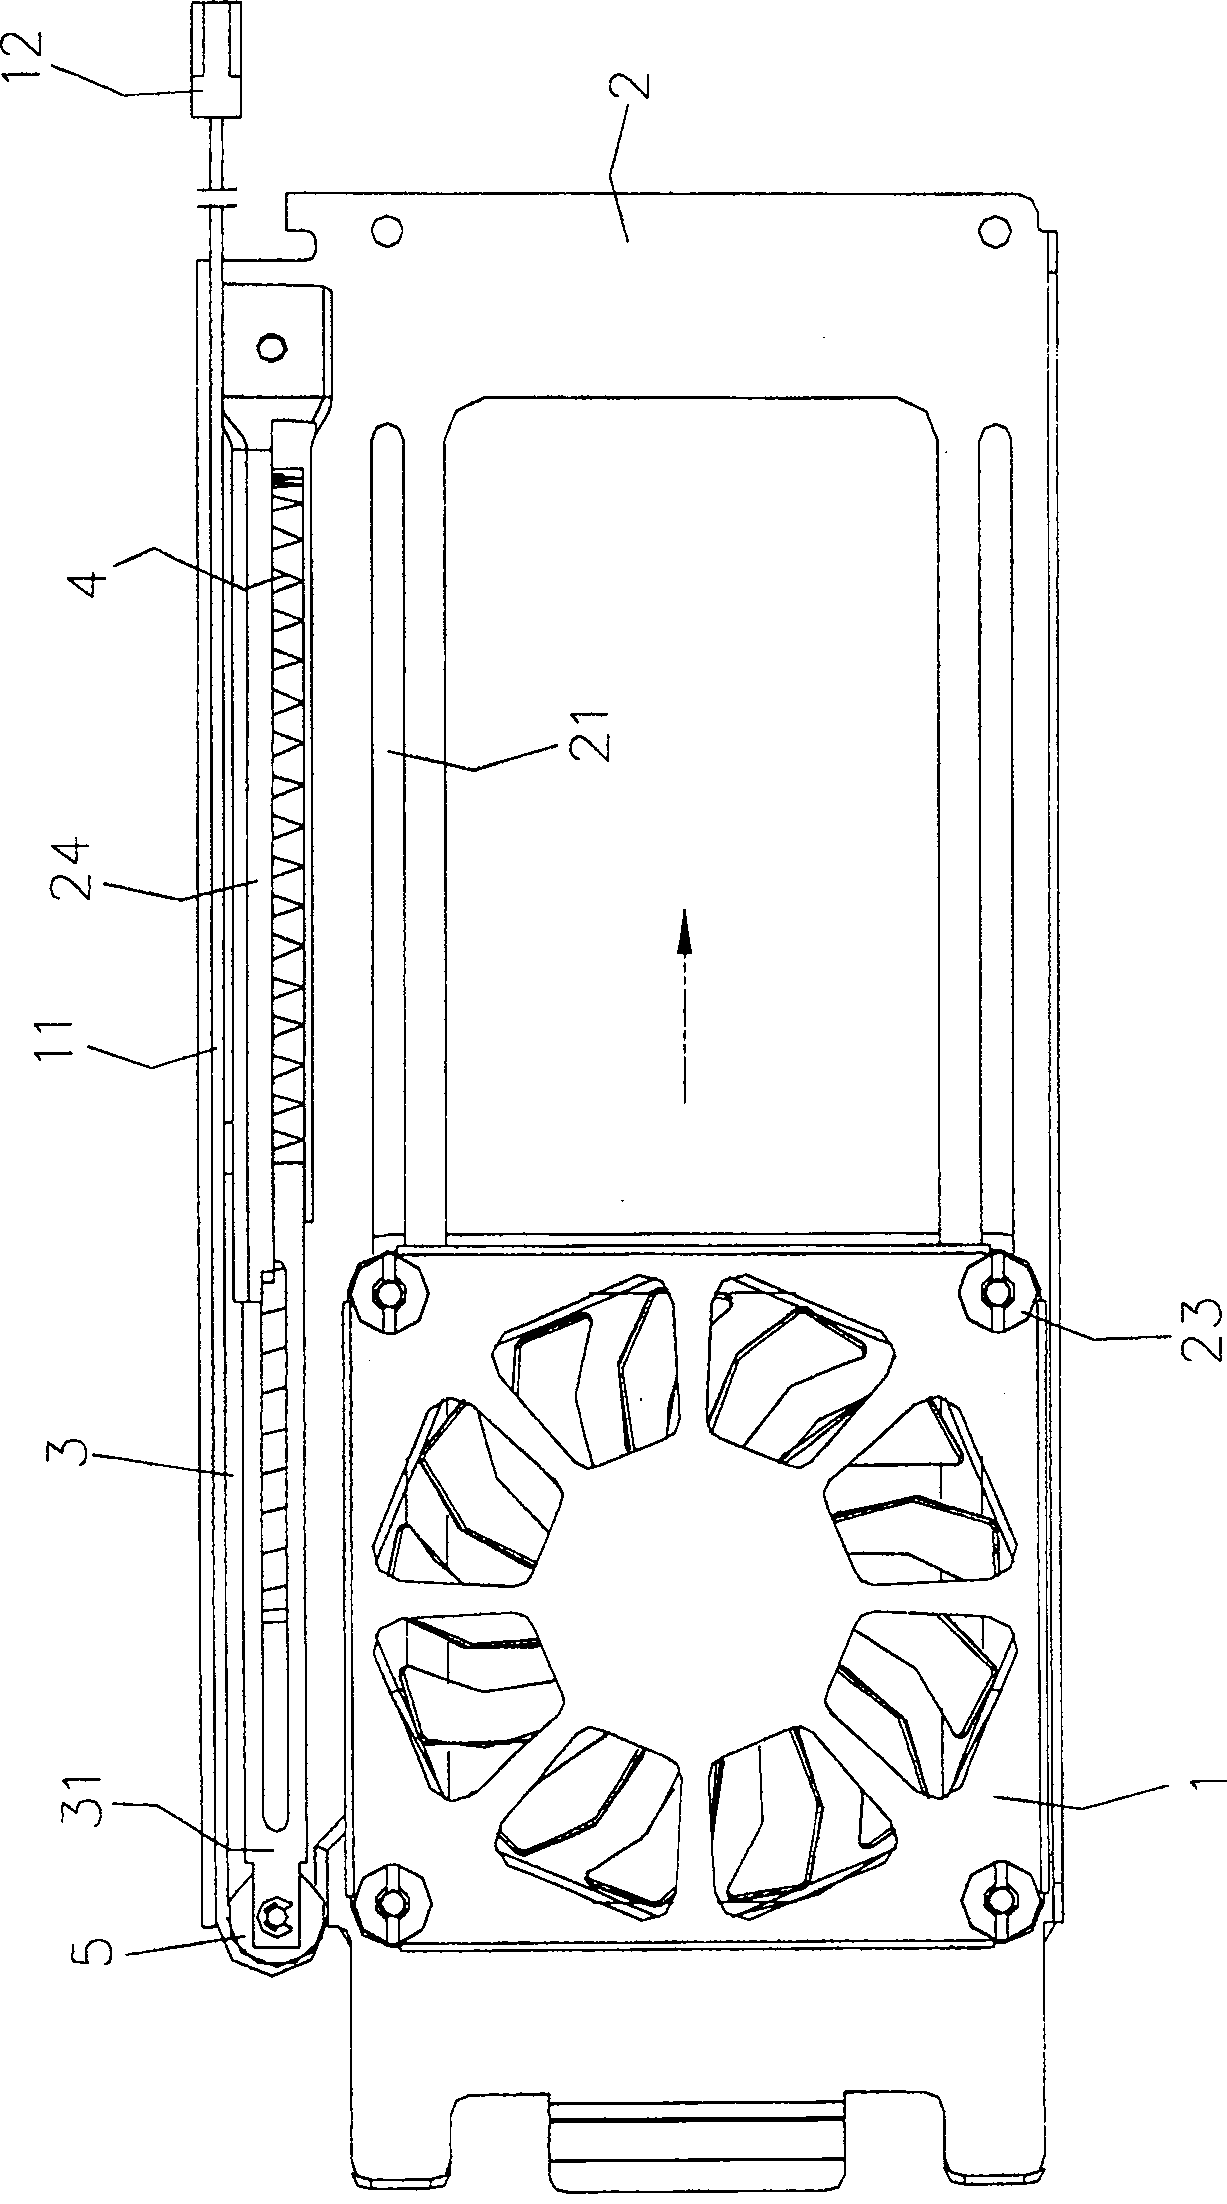 Power wire finishing device